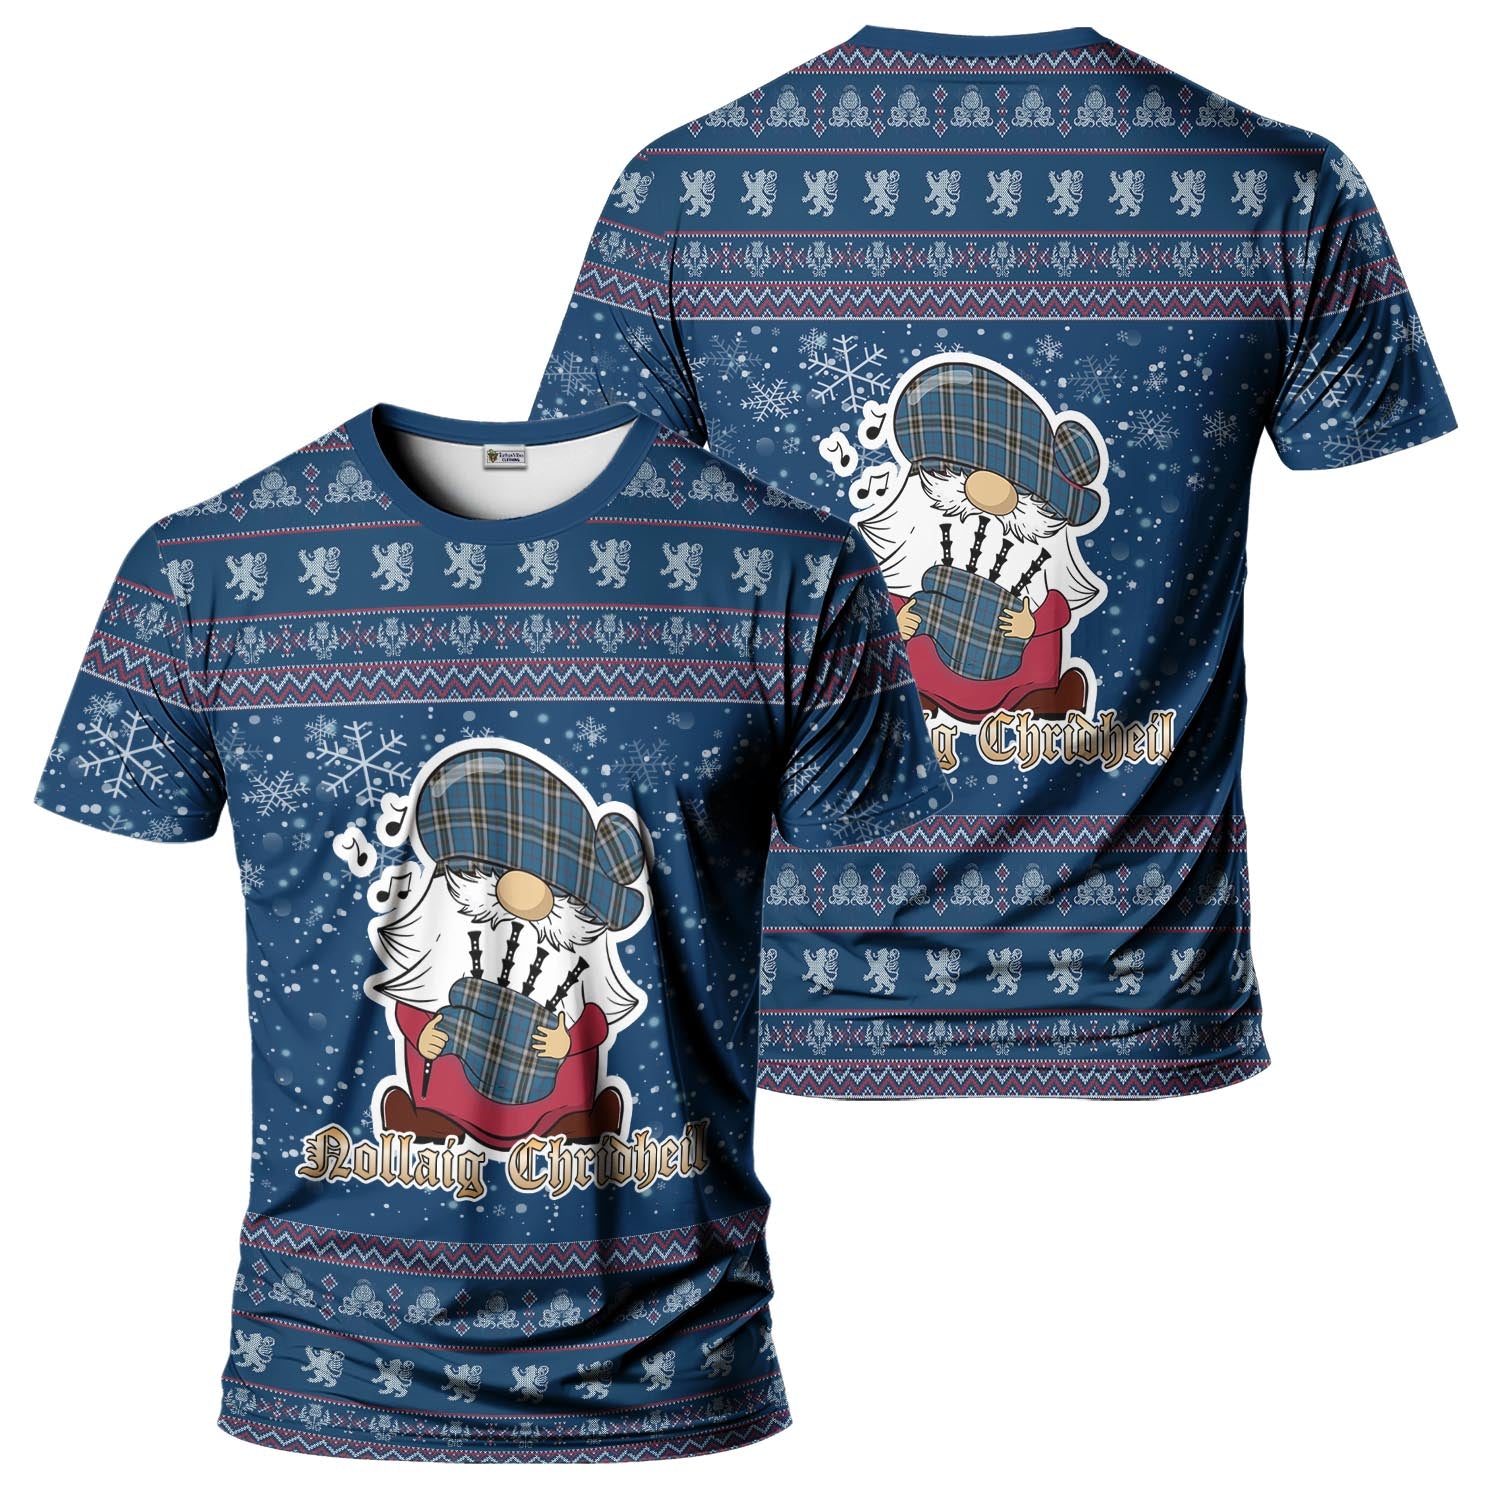 Thomson Dress Blue Clan Christmas Family T-Shirt with Funny Gnome Playing Bagpipes Kid's Shirt Blue - Tartanvibesclothing